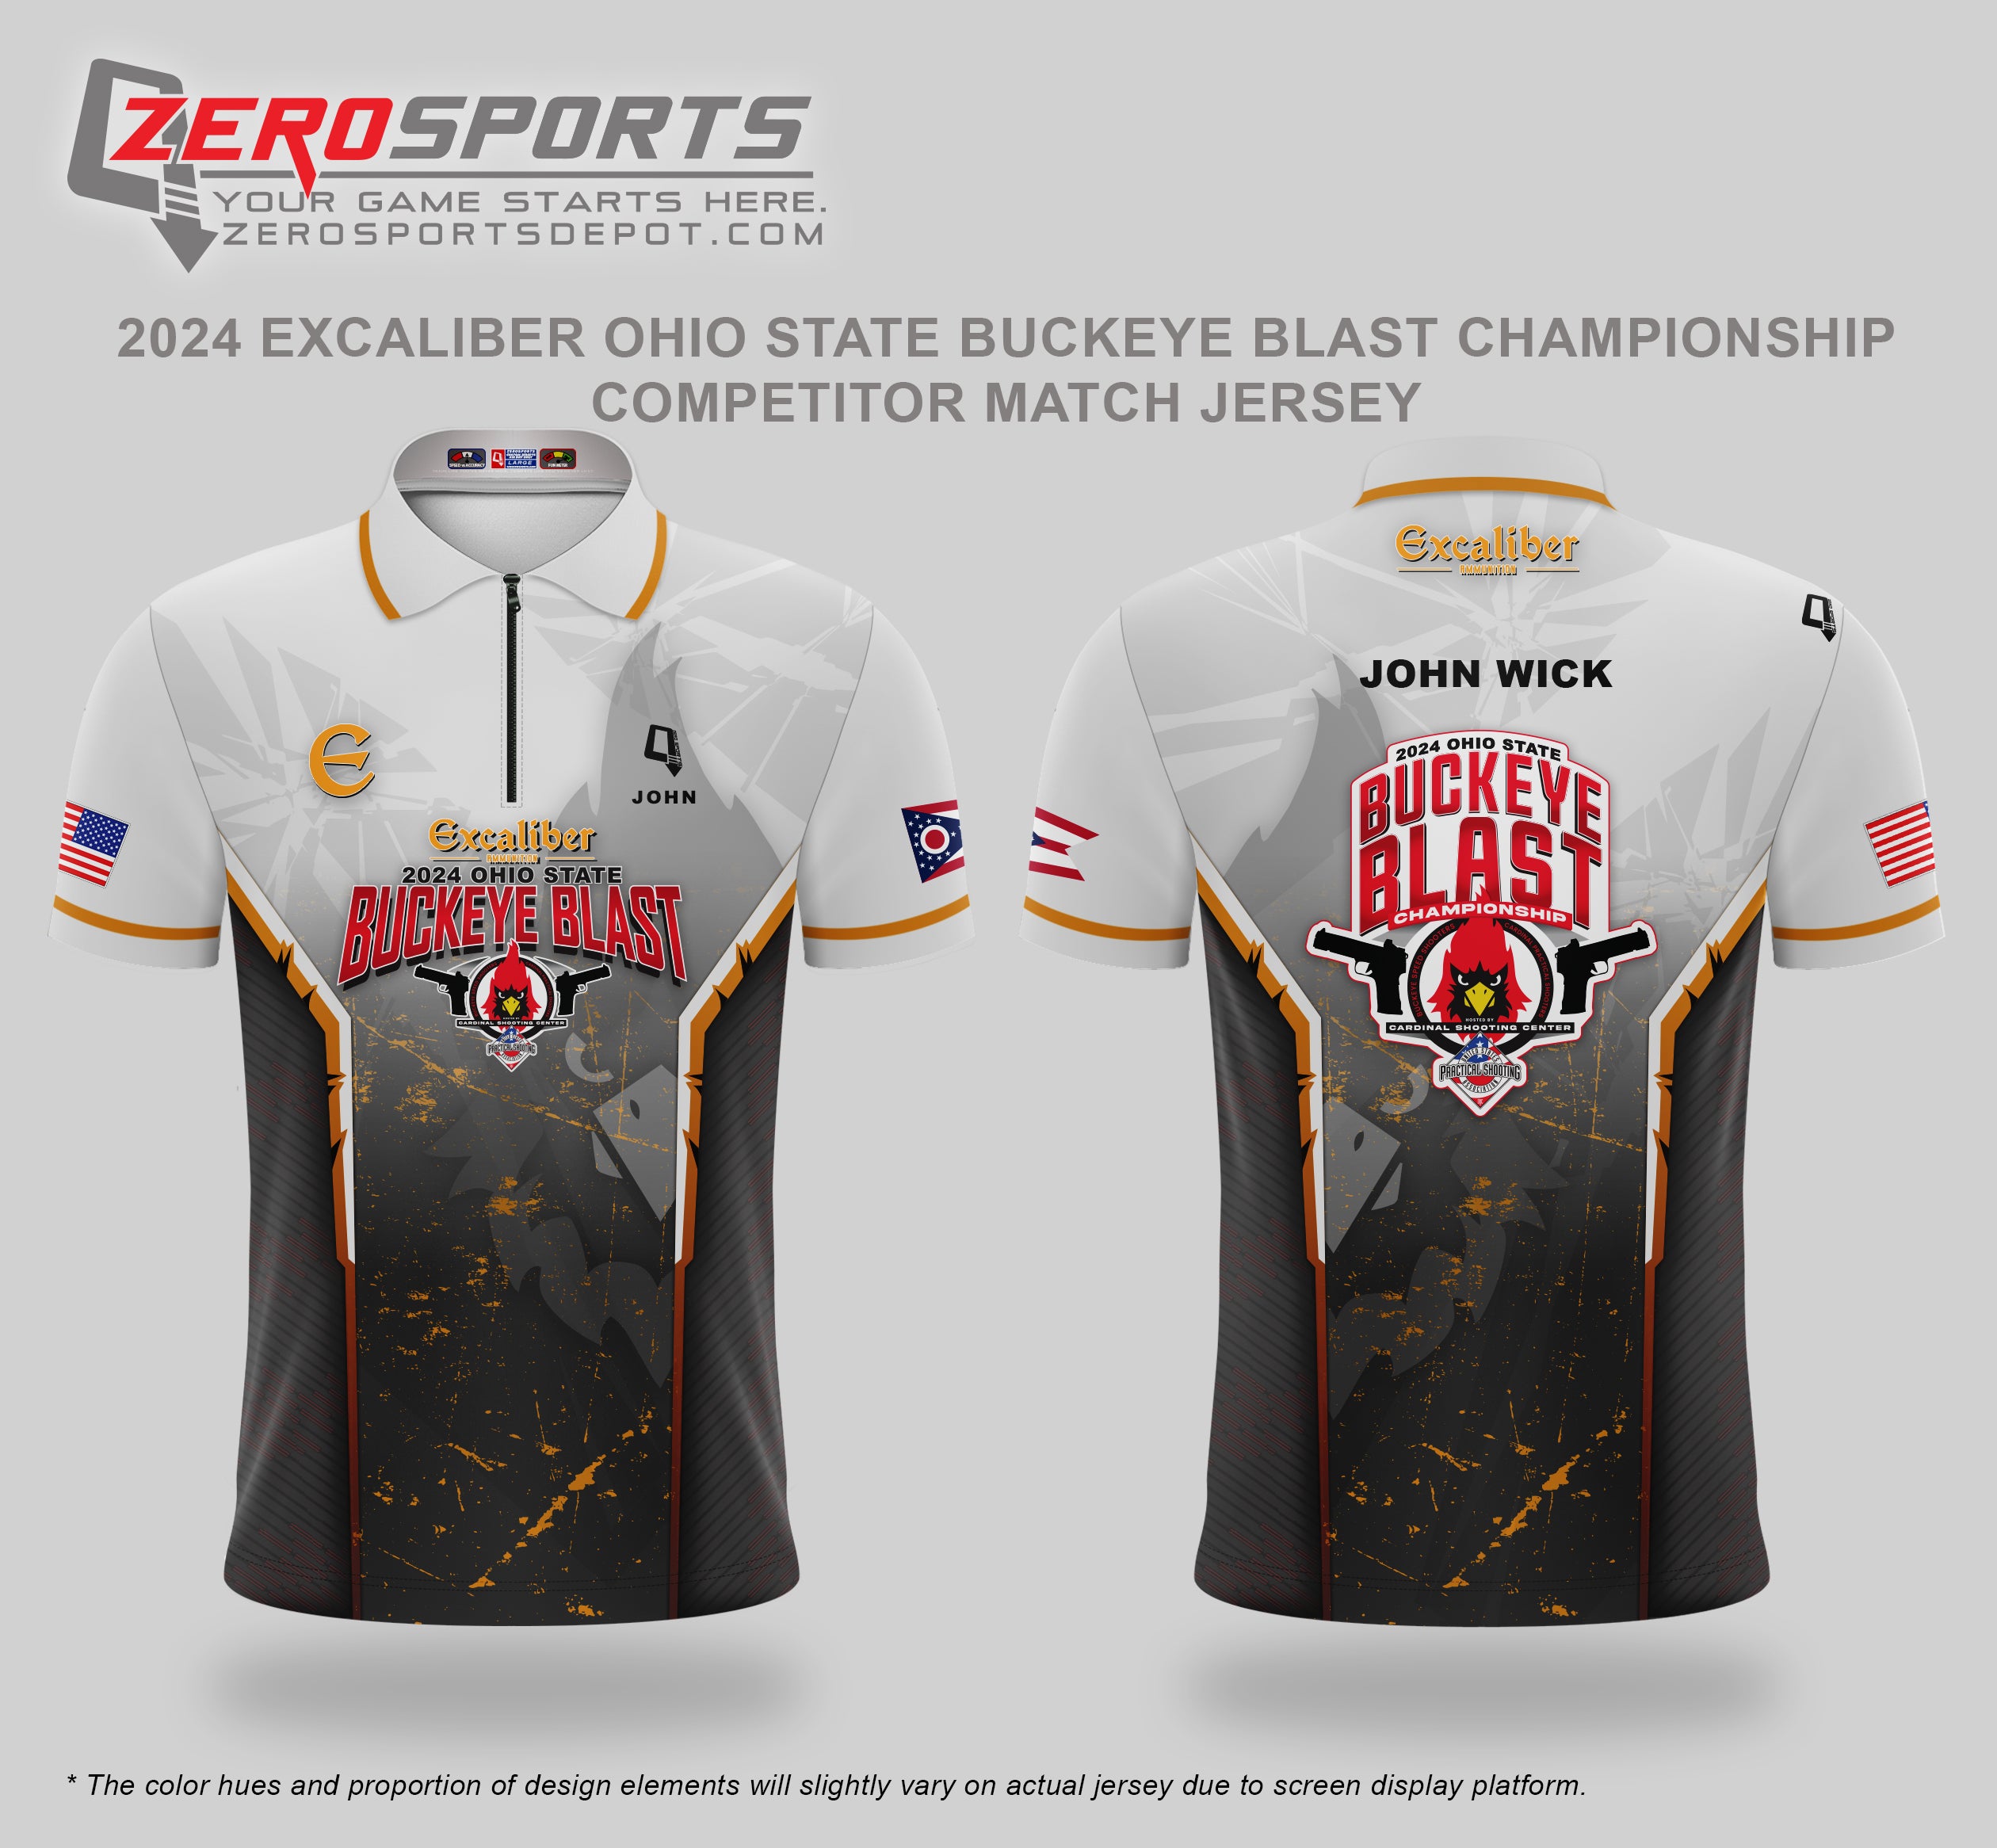 2024 Excaliber Ohio State Buckeye Blast Championship Match Jersey  **All orders after 4/10/2024 will be shipped directly to your address after the match.